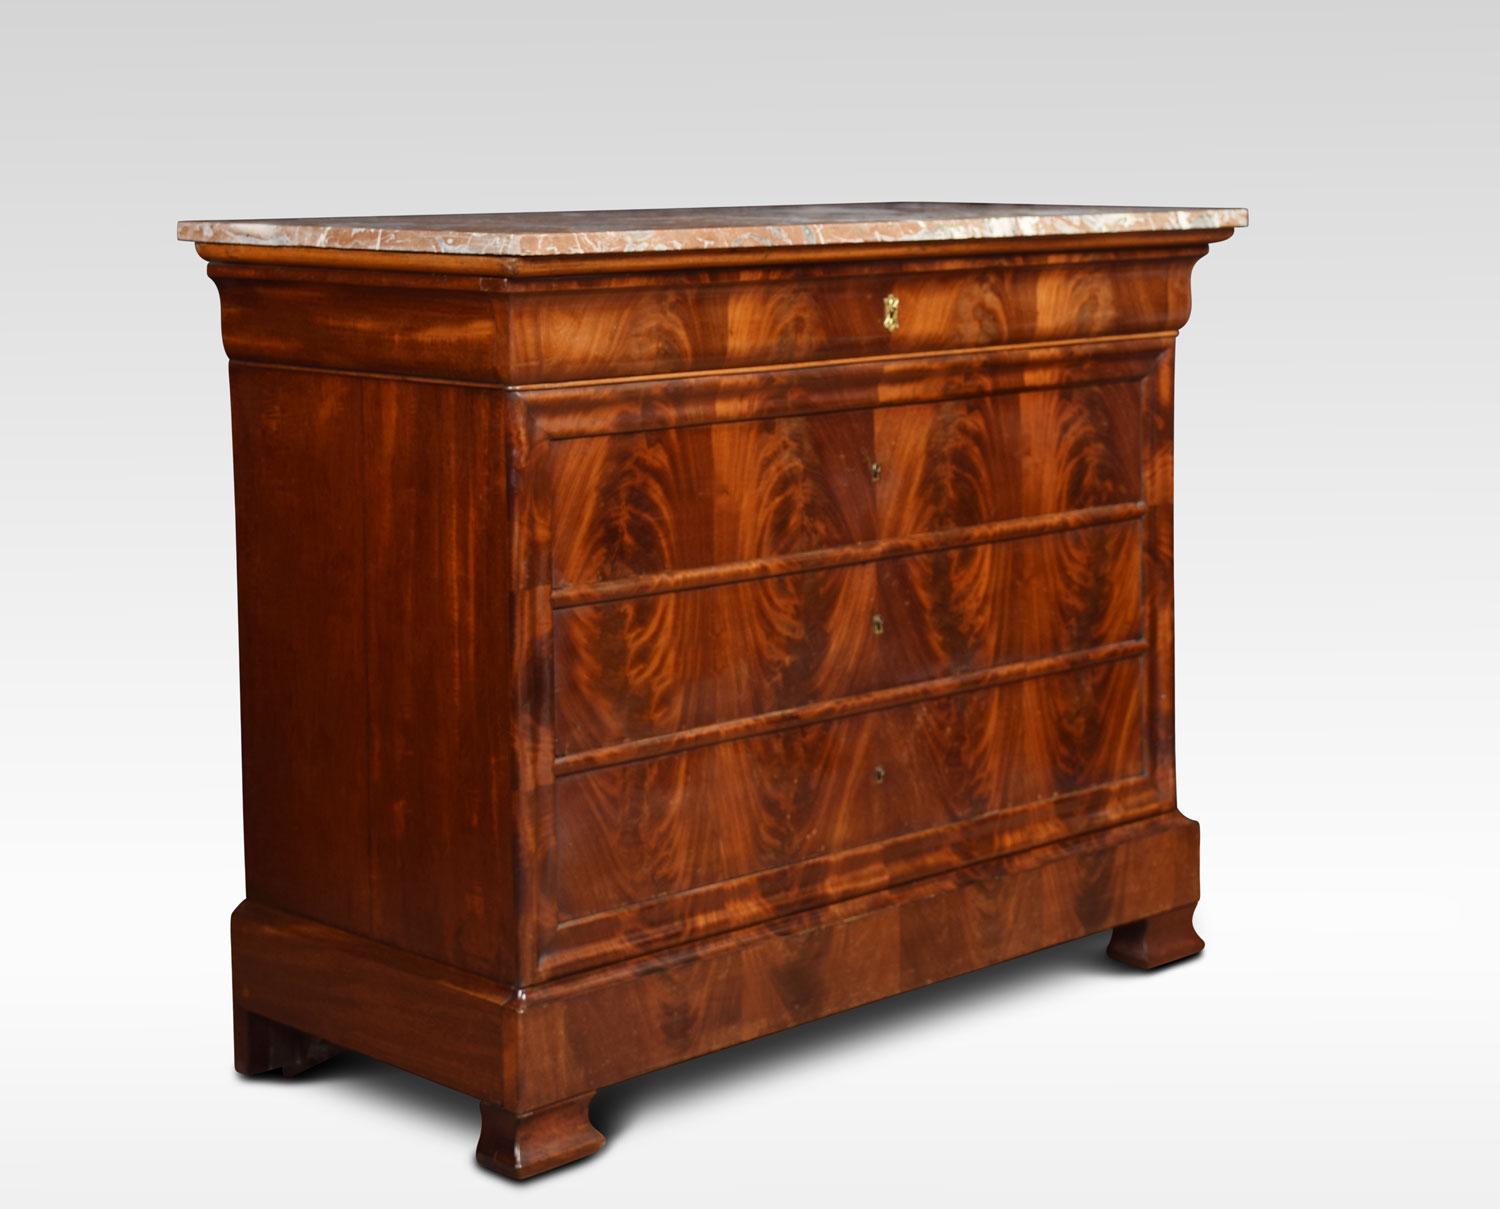 Mahogany Biedermeier chest of draws, the Spanish brocatello marble rectangular top, above a cushion moulded projecting frieze drawer with three long drawers below. Having an unusual secret base draw, all raised up on block feet.
Dimensions:
Height